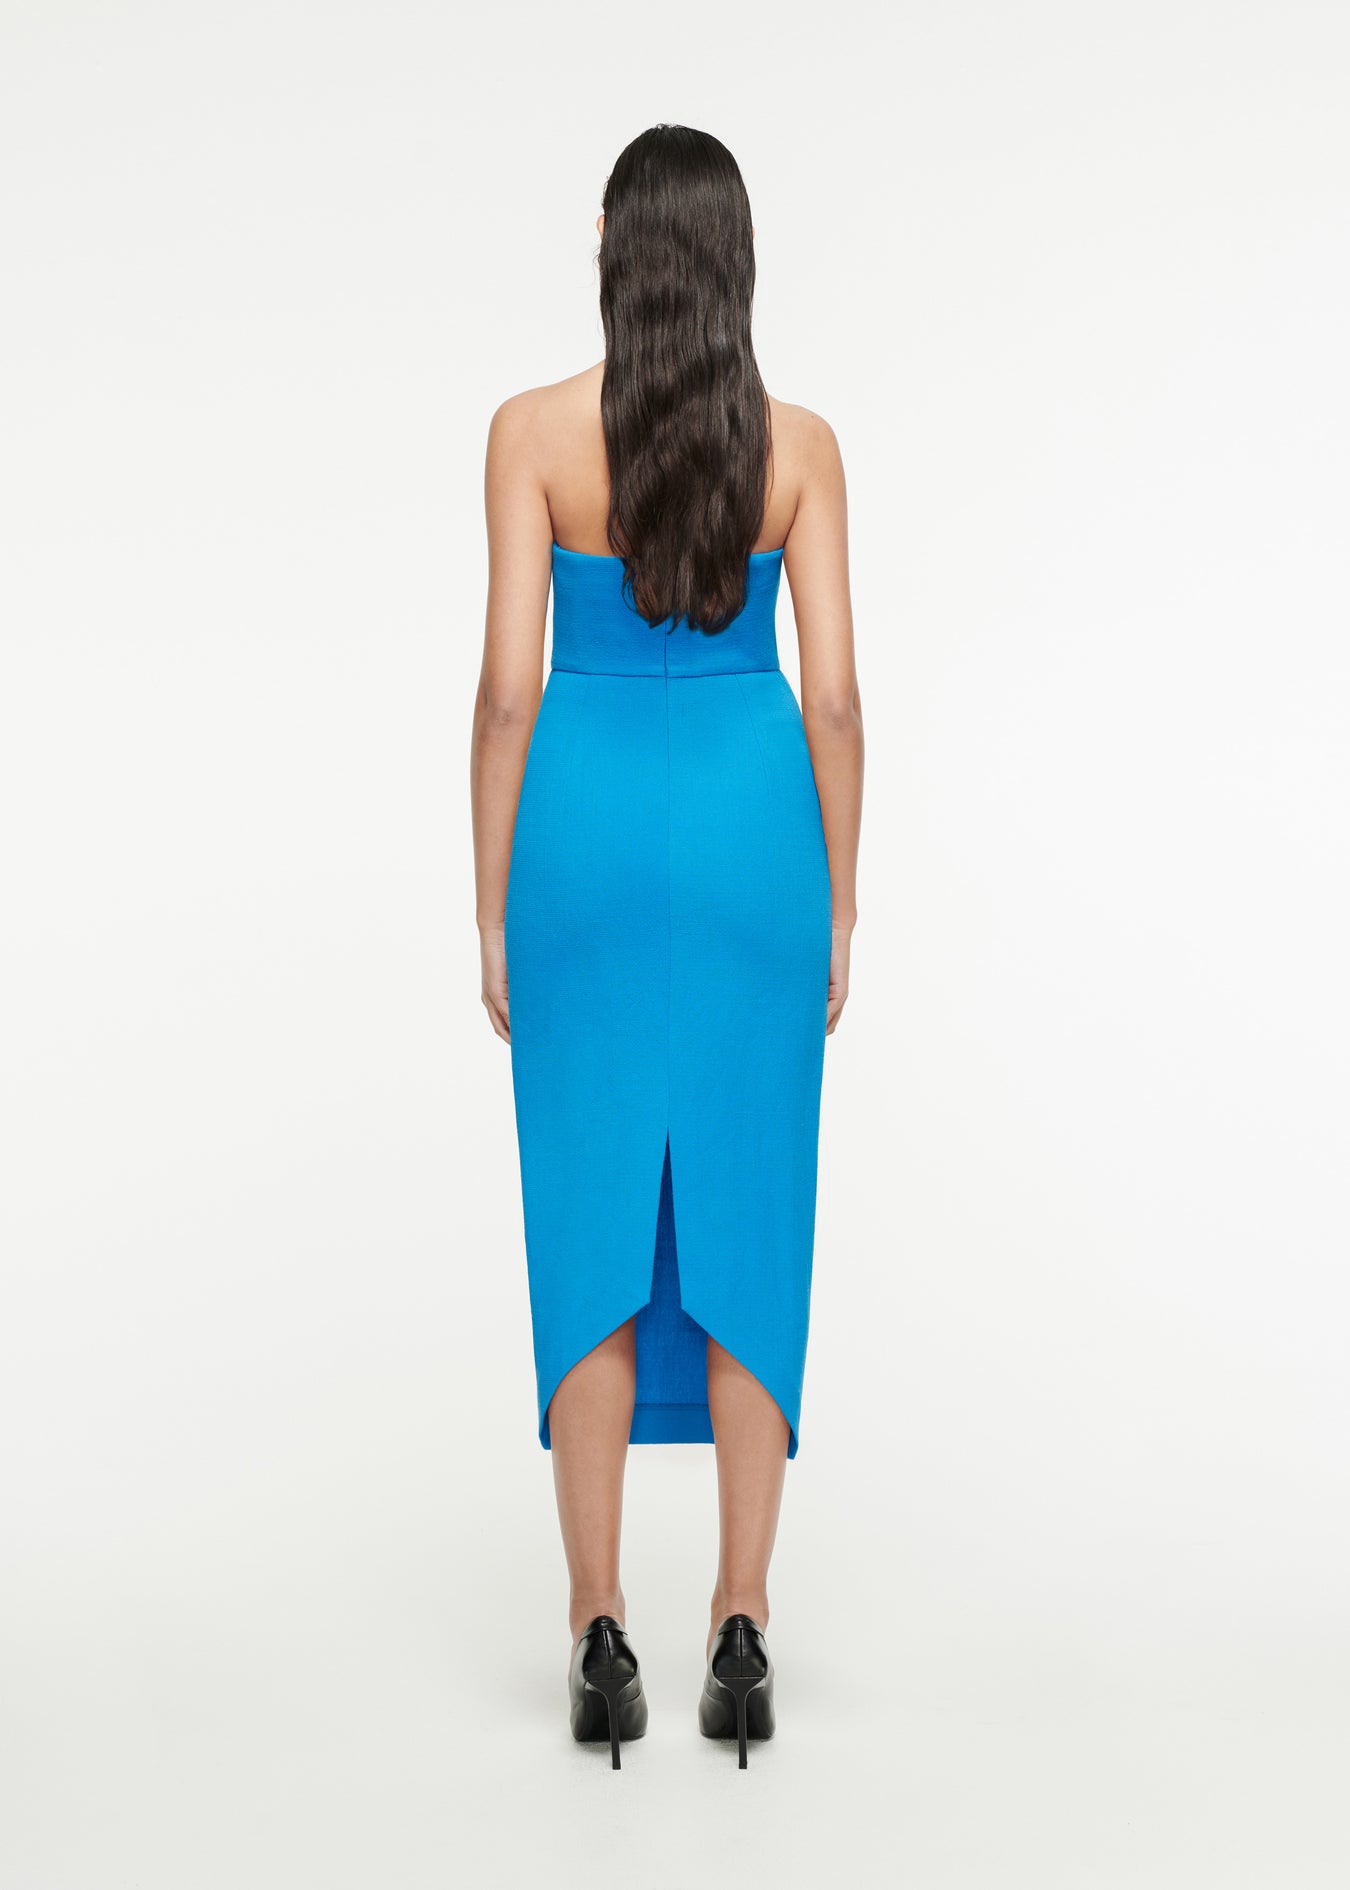 The back of a woman wearing the Strapless Origami Midi Dress in Blue